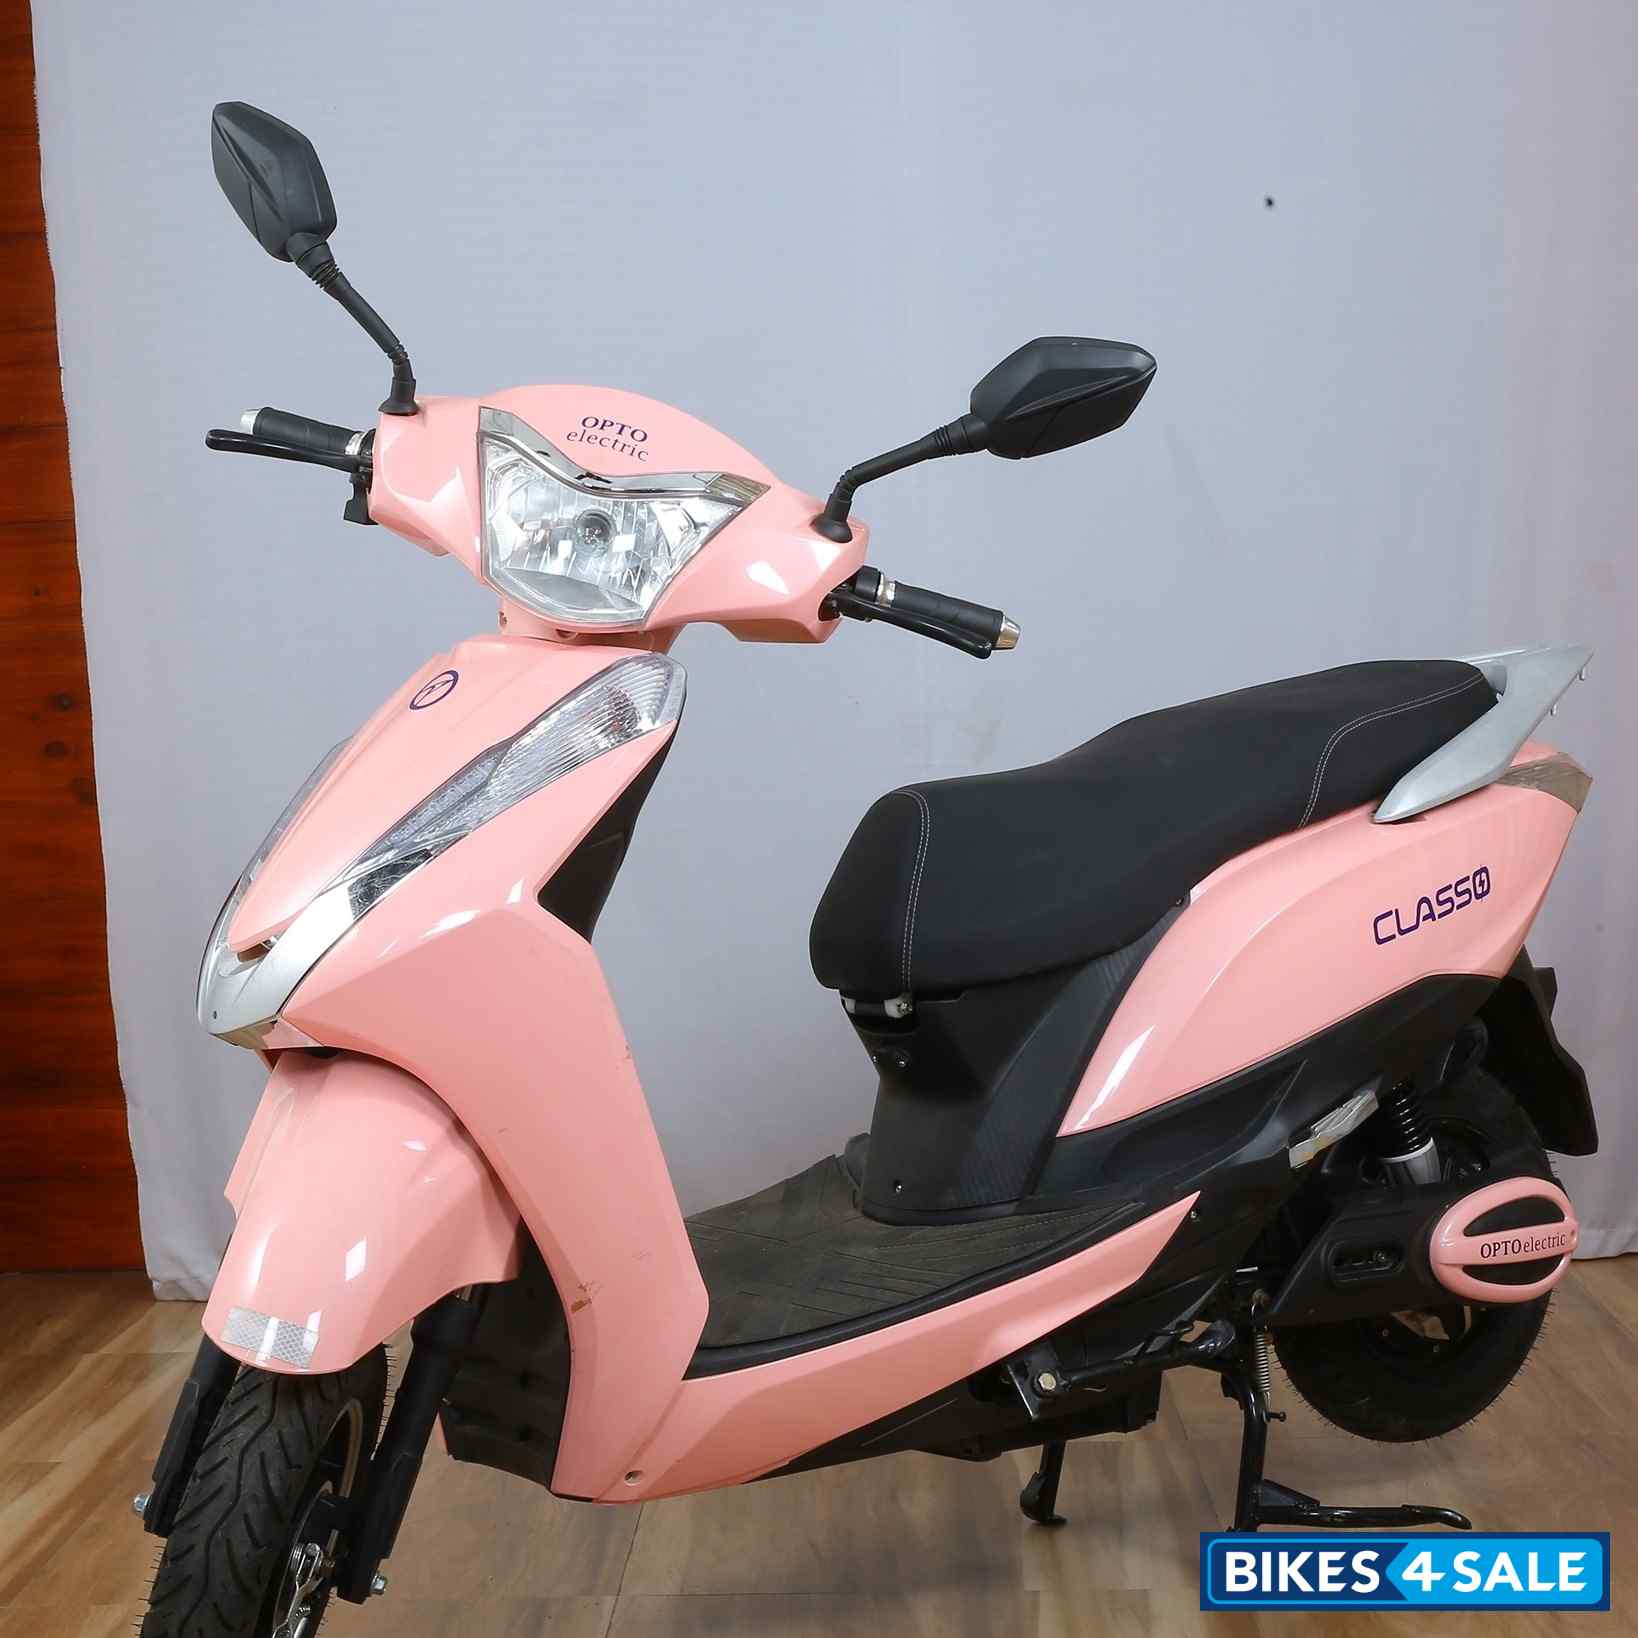 Opto Electric Classo - Pink